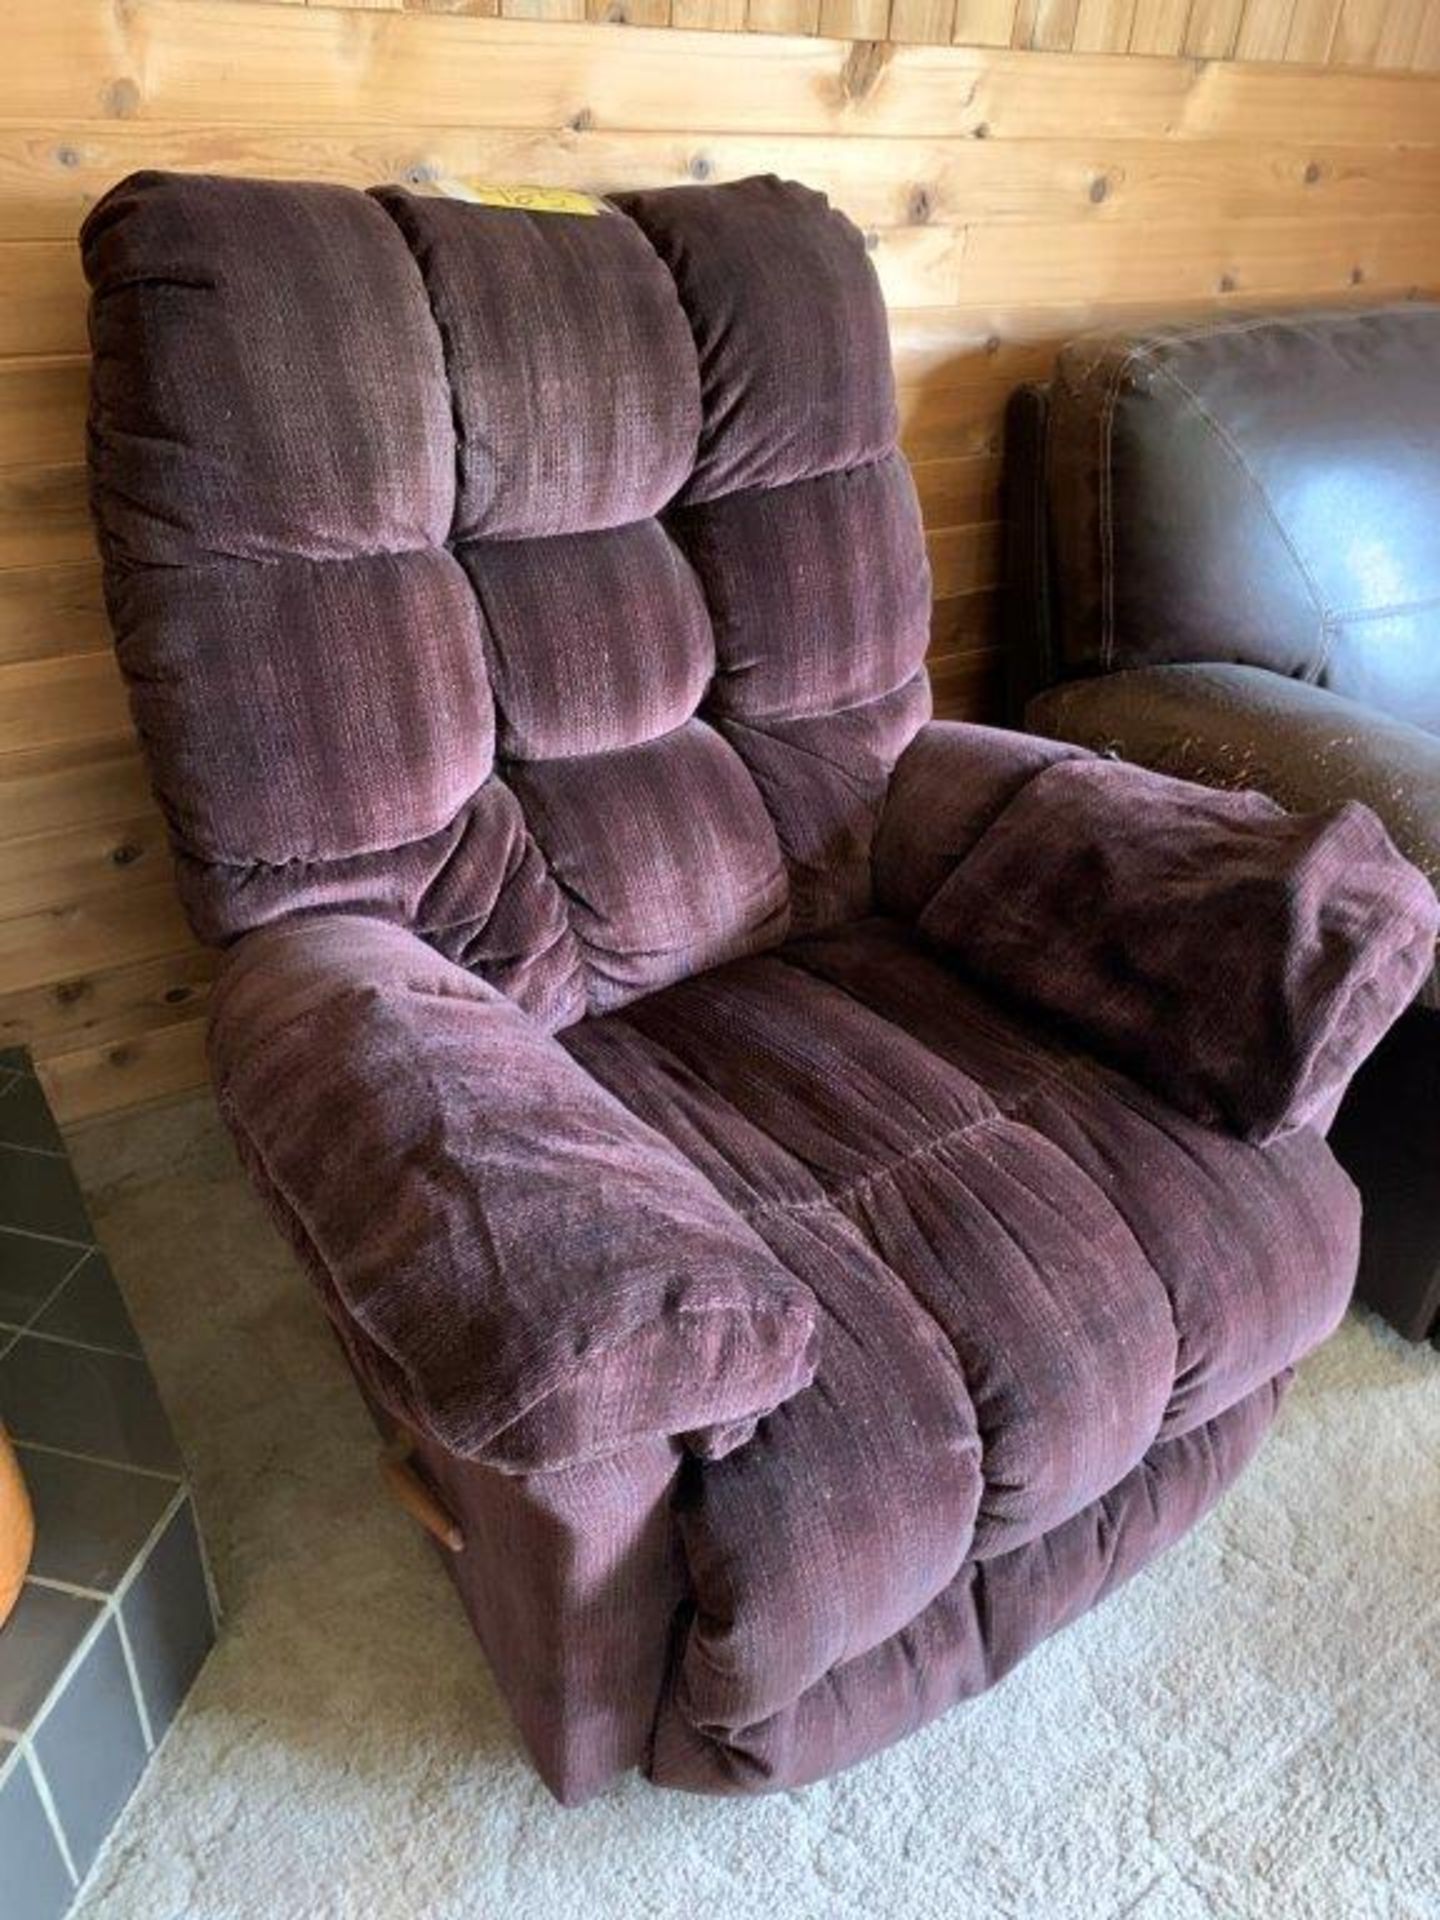 LEATHER SOFA AND CHAIR, 1-CLOTH RECLINER CHAIR - Image 3 of 4